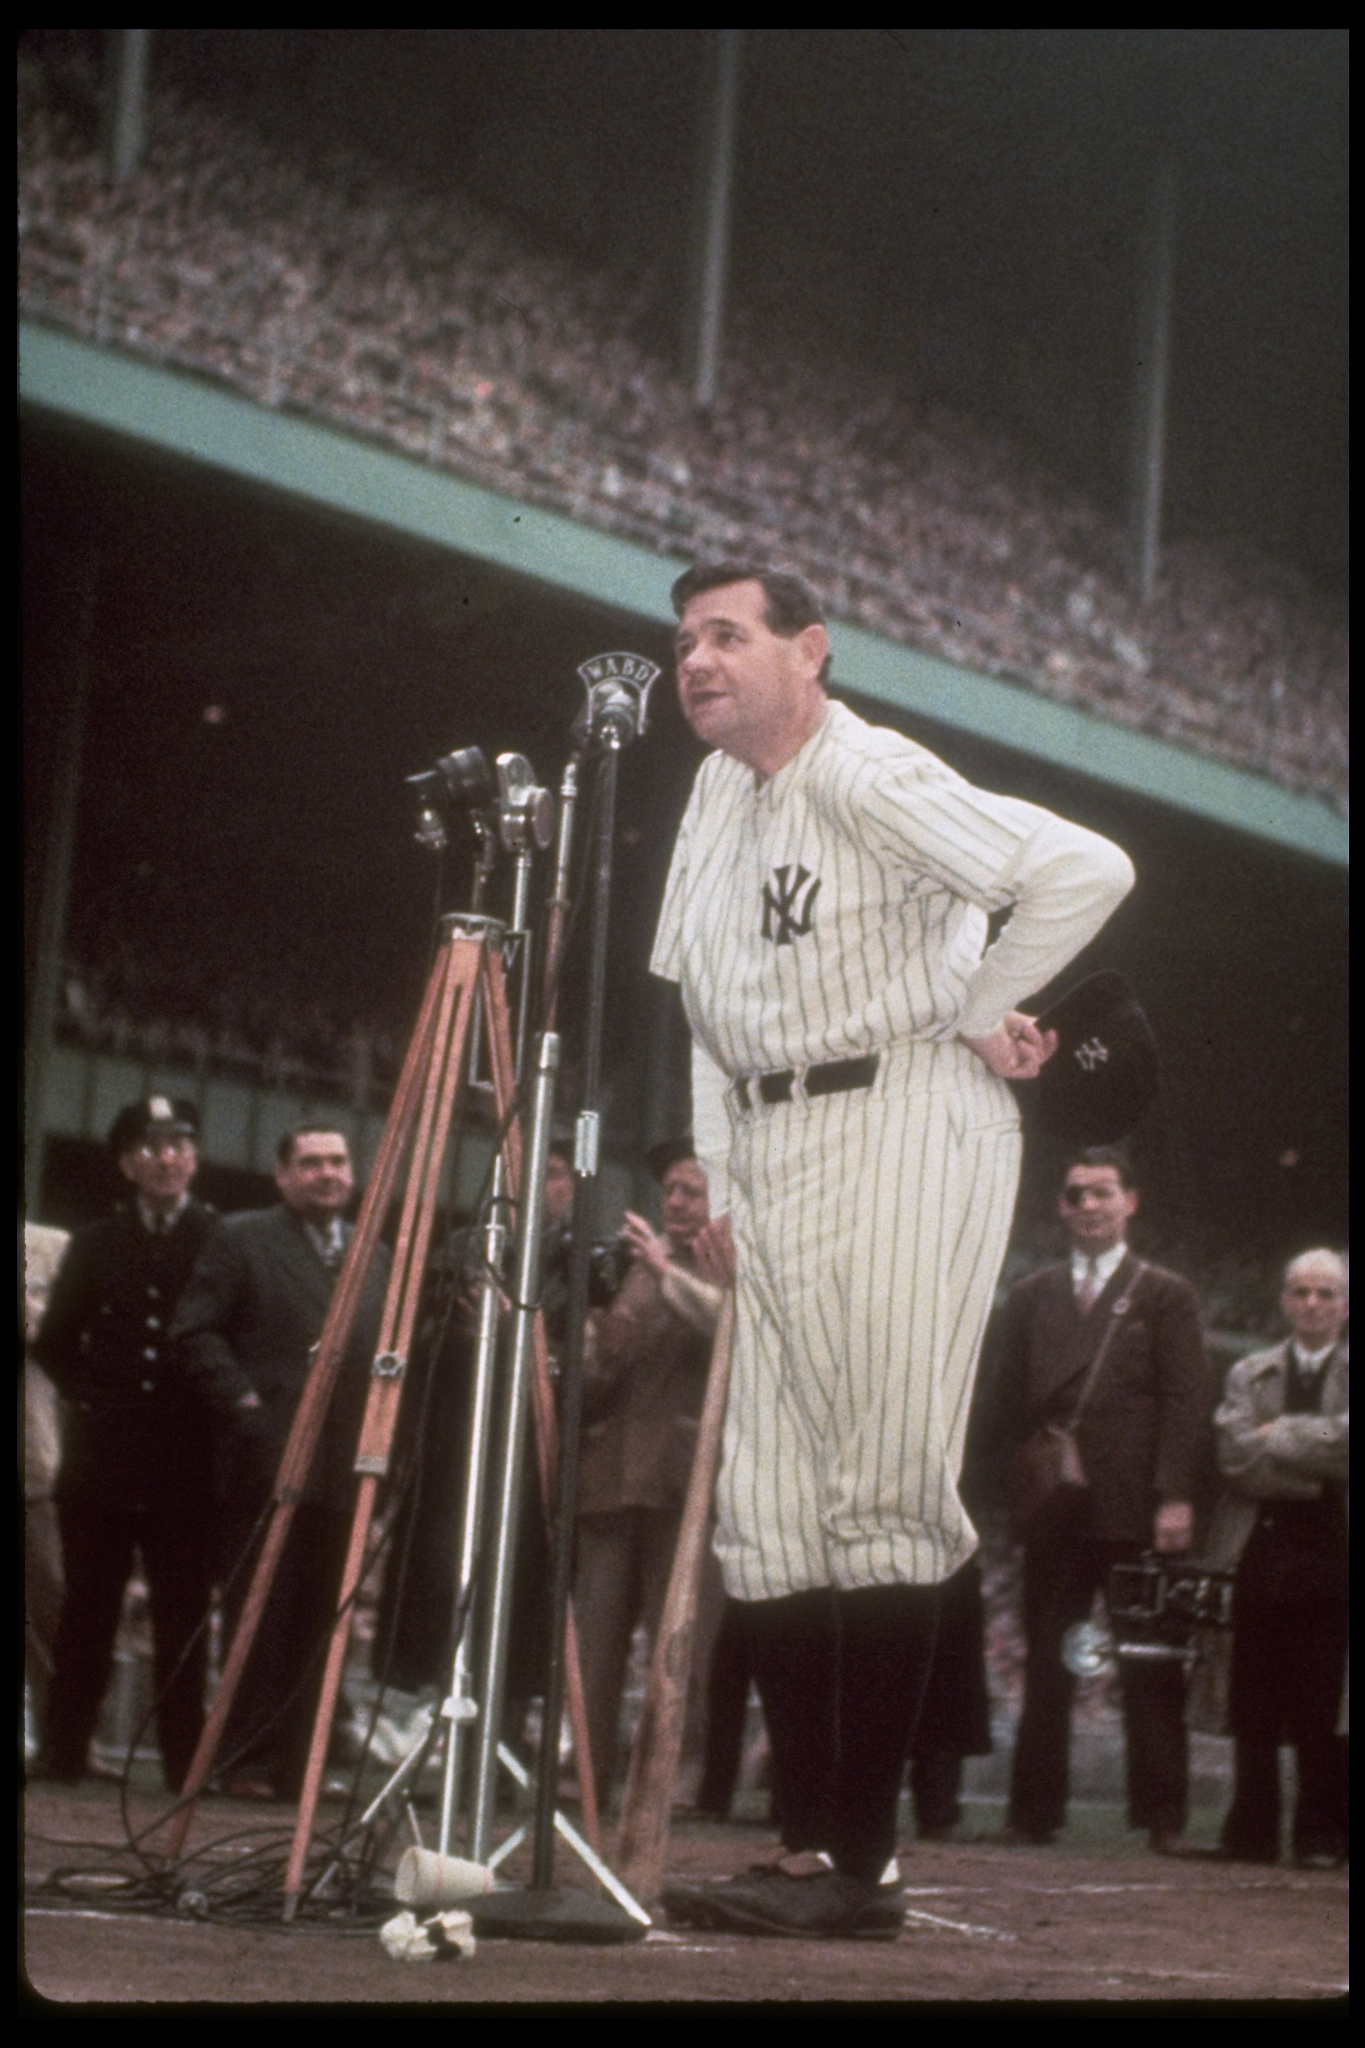 Babe Ruth thanks the crowd during his final appearance in pinstripes, June 13, 1948.